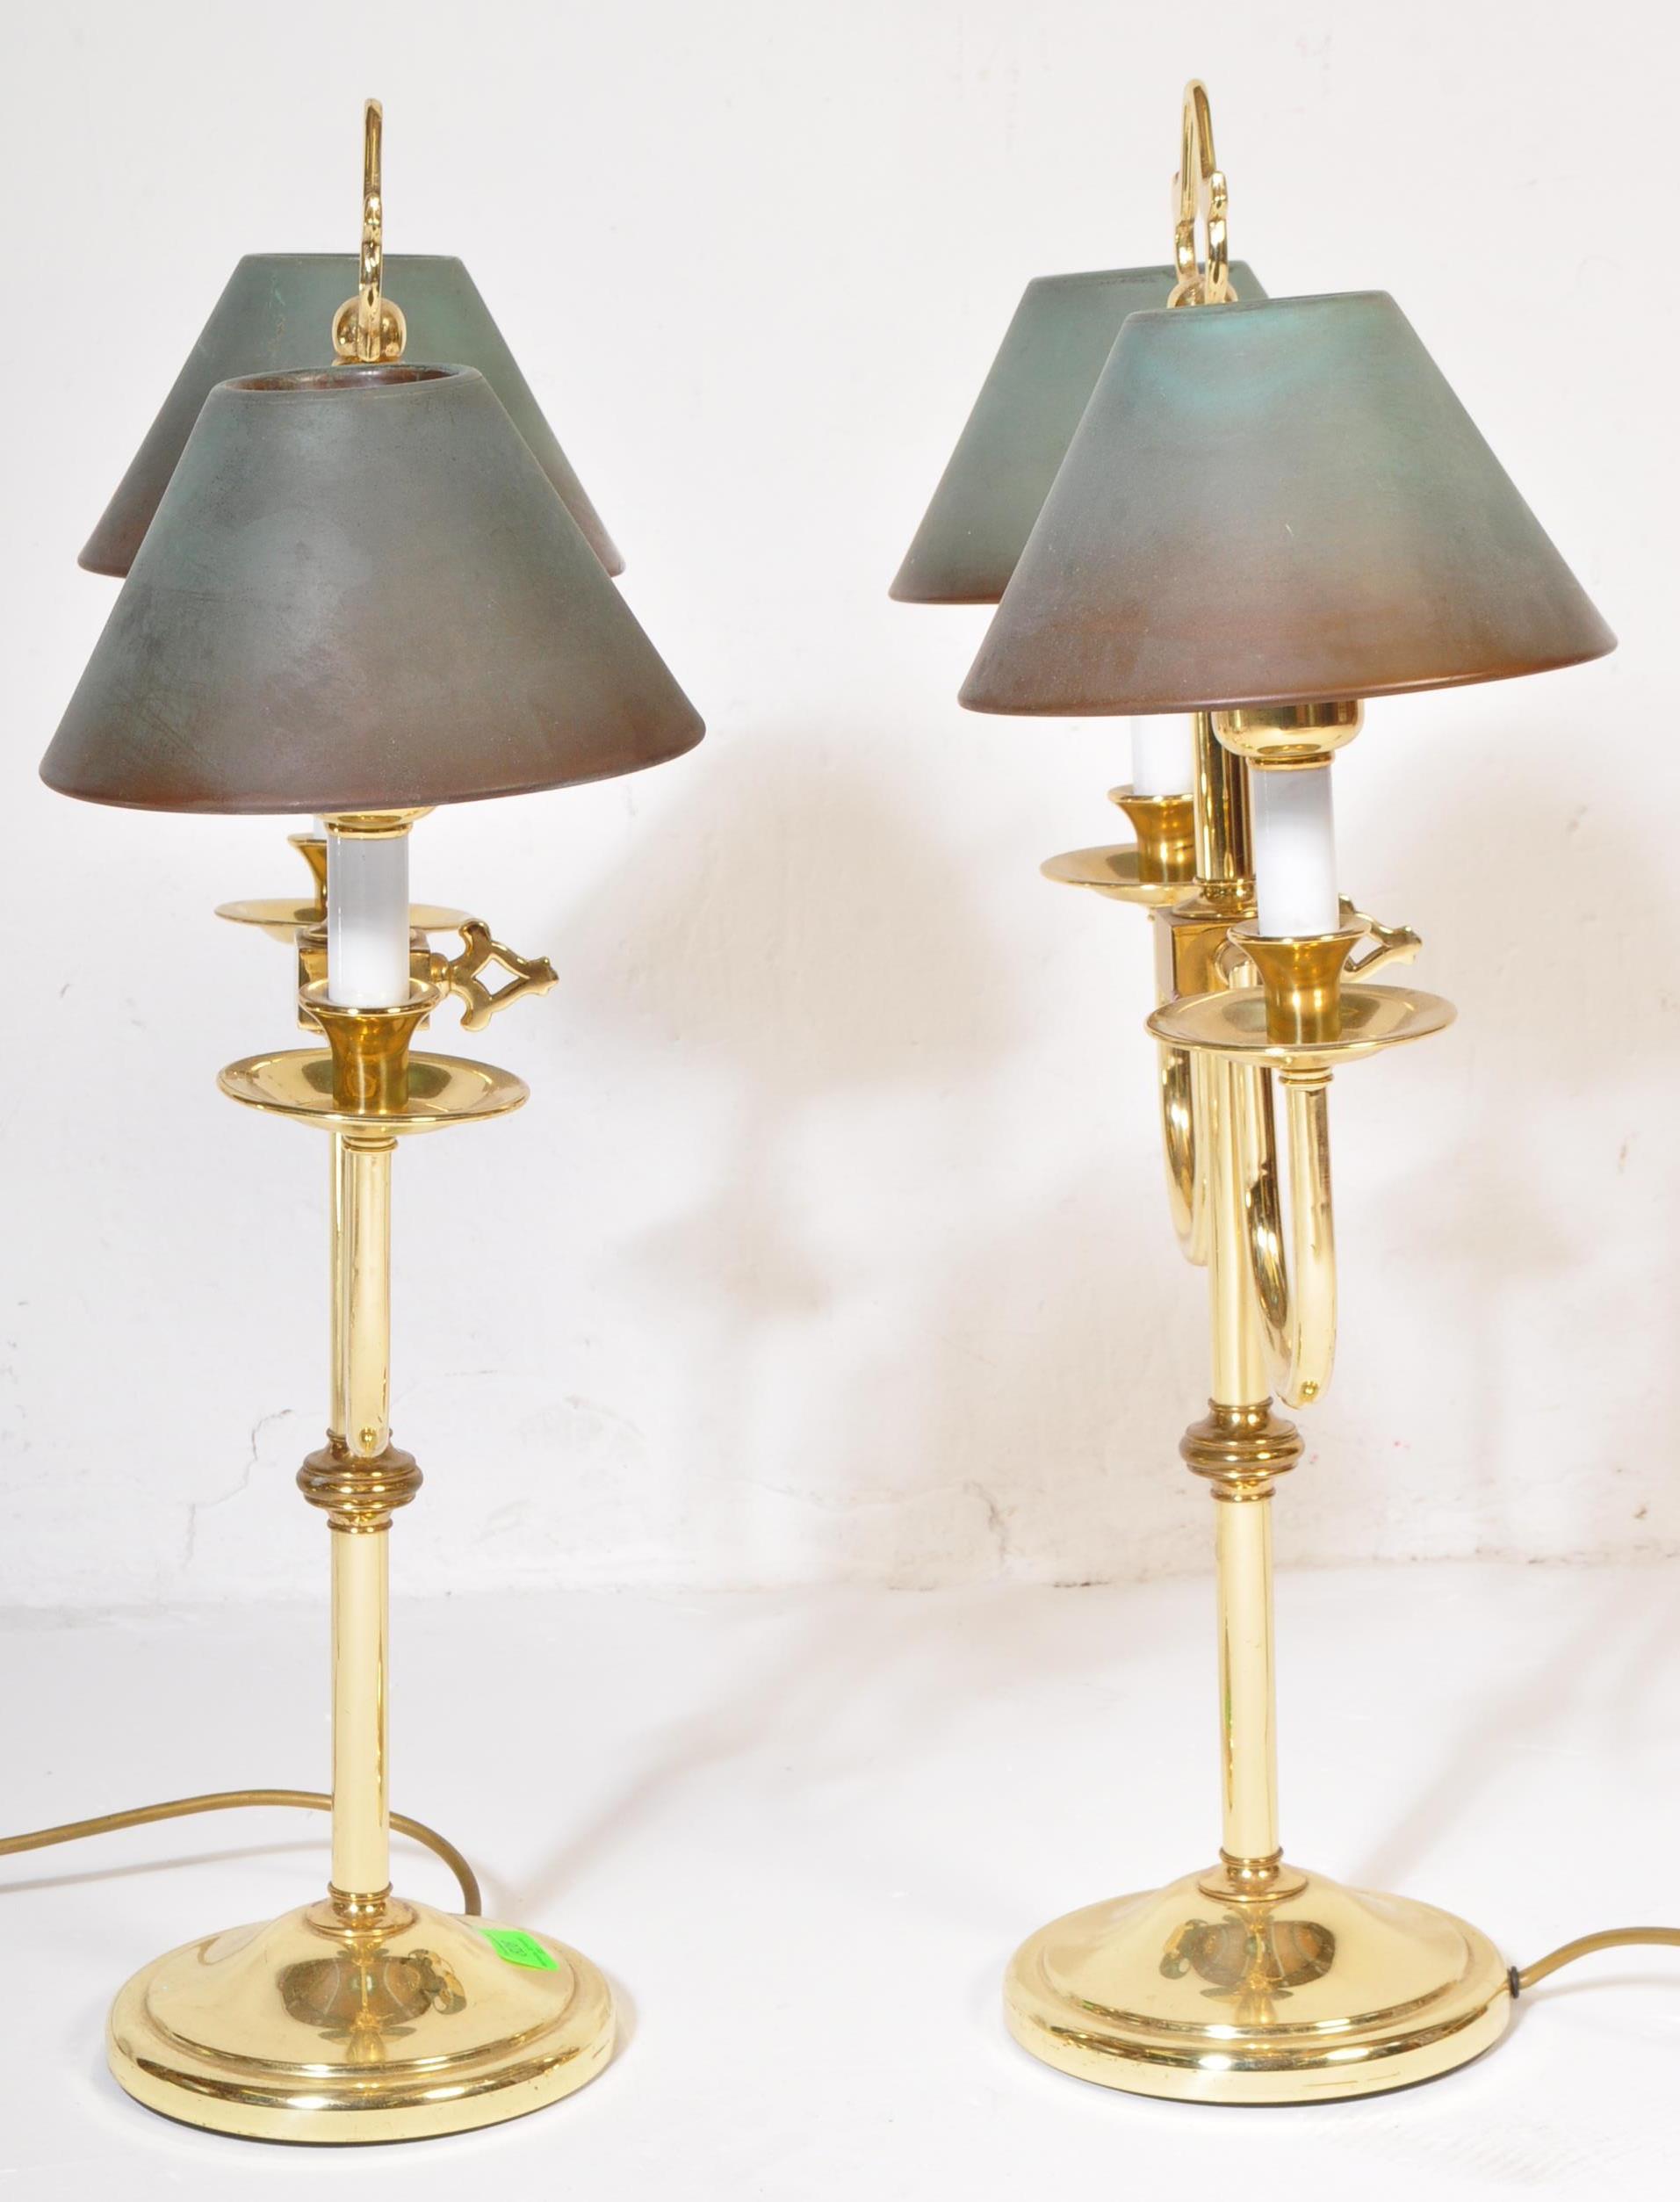 PAIR OF RETRO VINTAGE GILT METAL CASINO TABLE LAMPS - Image 2 of 5